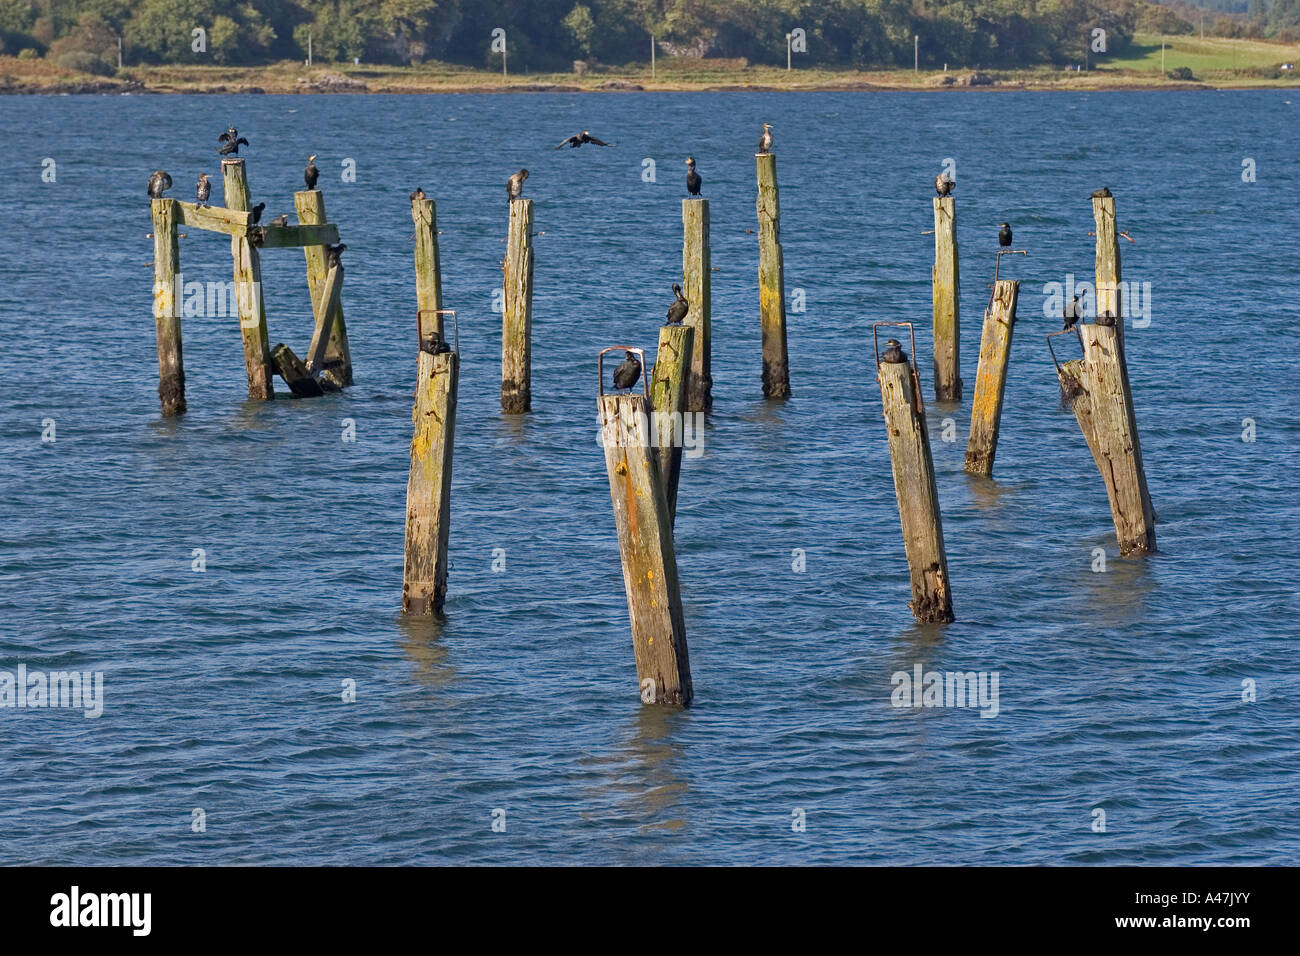 Cormorants resting and preening on old wooden pier posts at Salen in Sound of Mull, Isle of Mull, Argyll and Bute, Scotland, UK Stock Photo